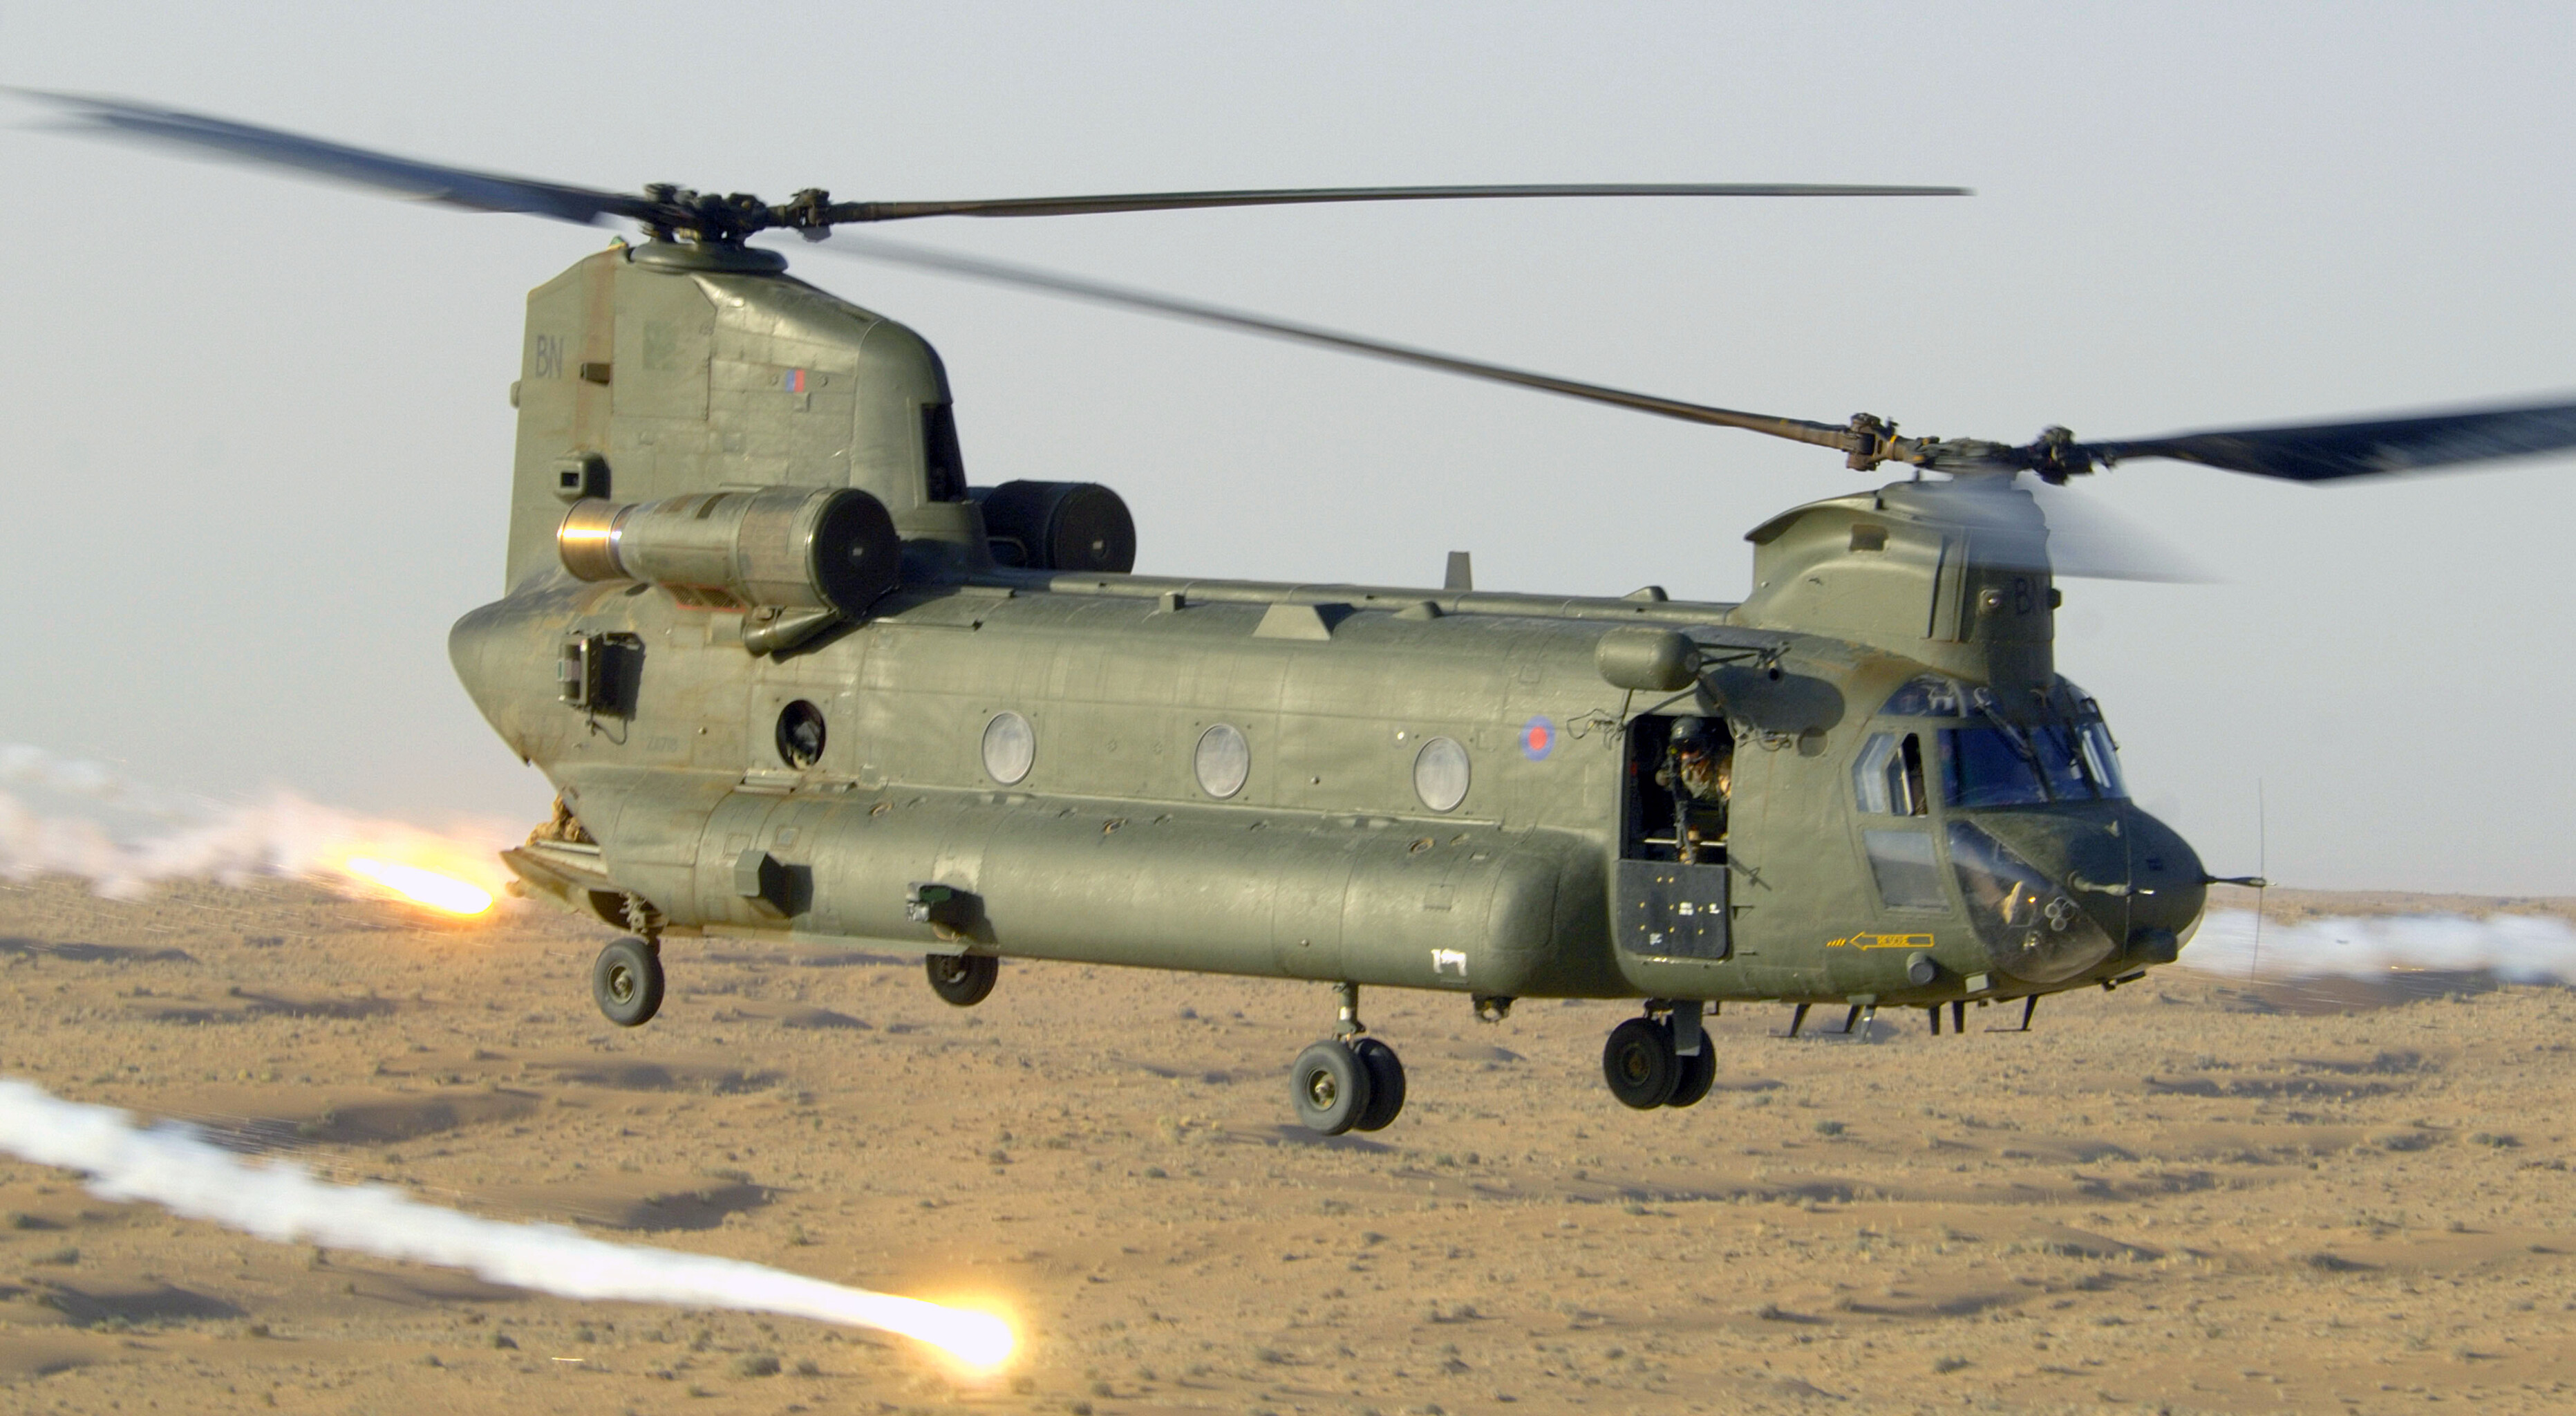 Chinook_Releases_Flares_over_Afghanistan_MOD_45149667.jpg